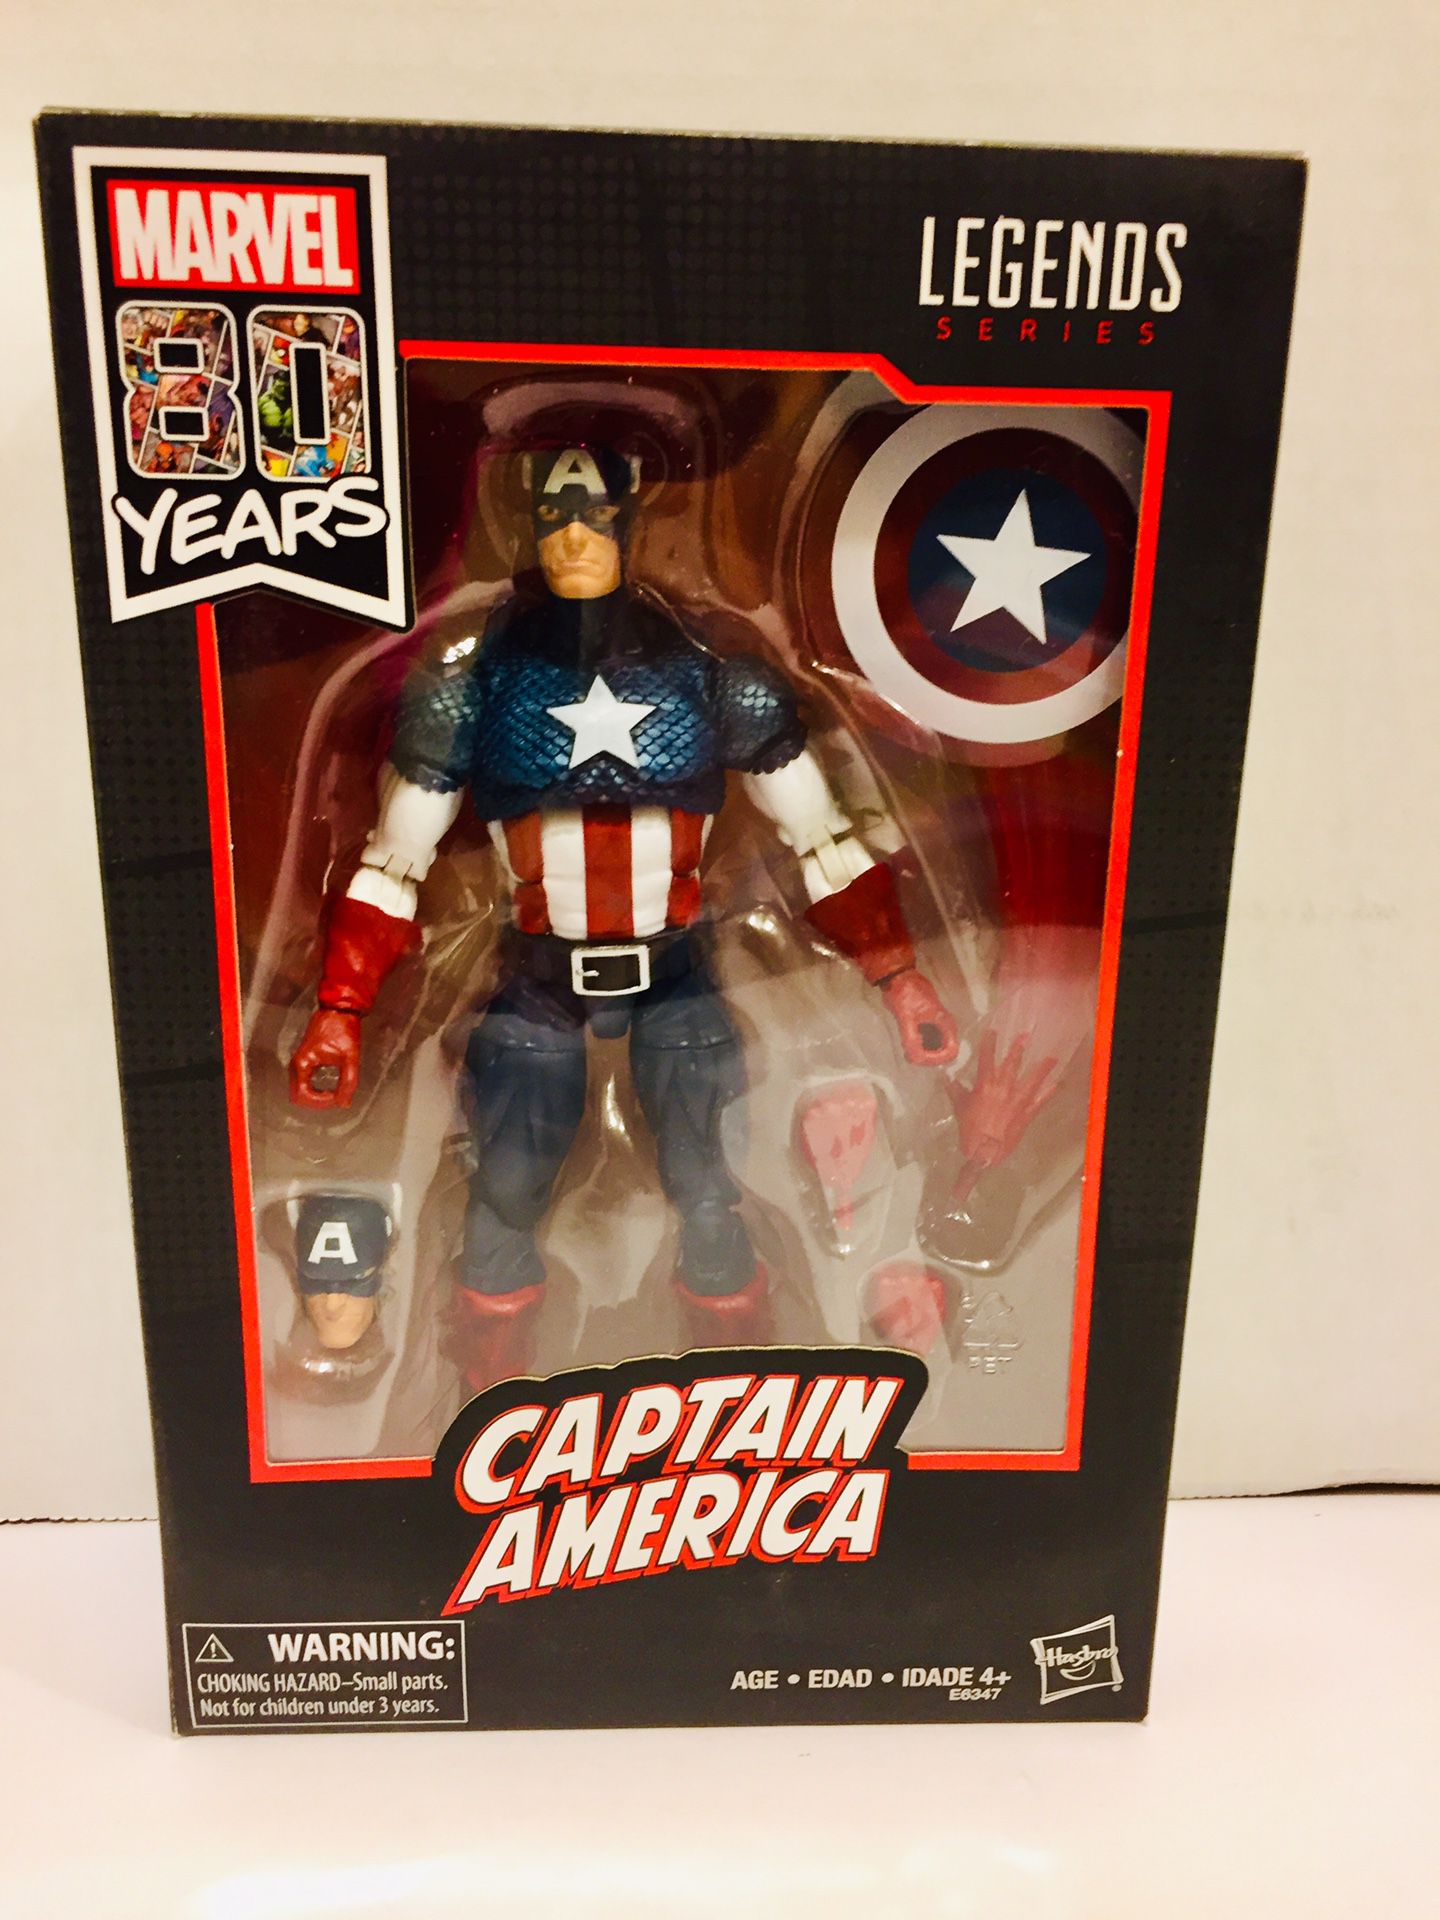 BRAND NEW! CAPTAIN AMERICA, Collectable Item